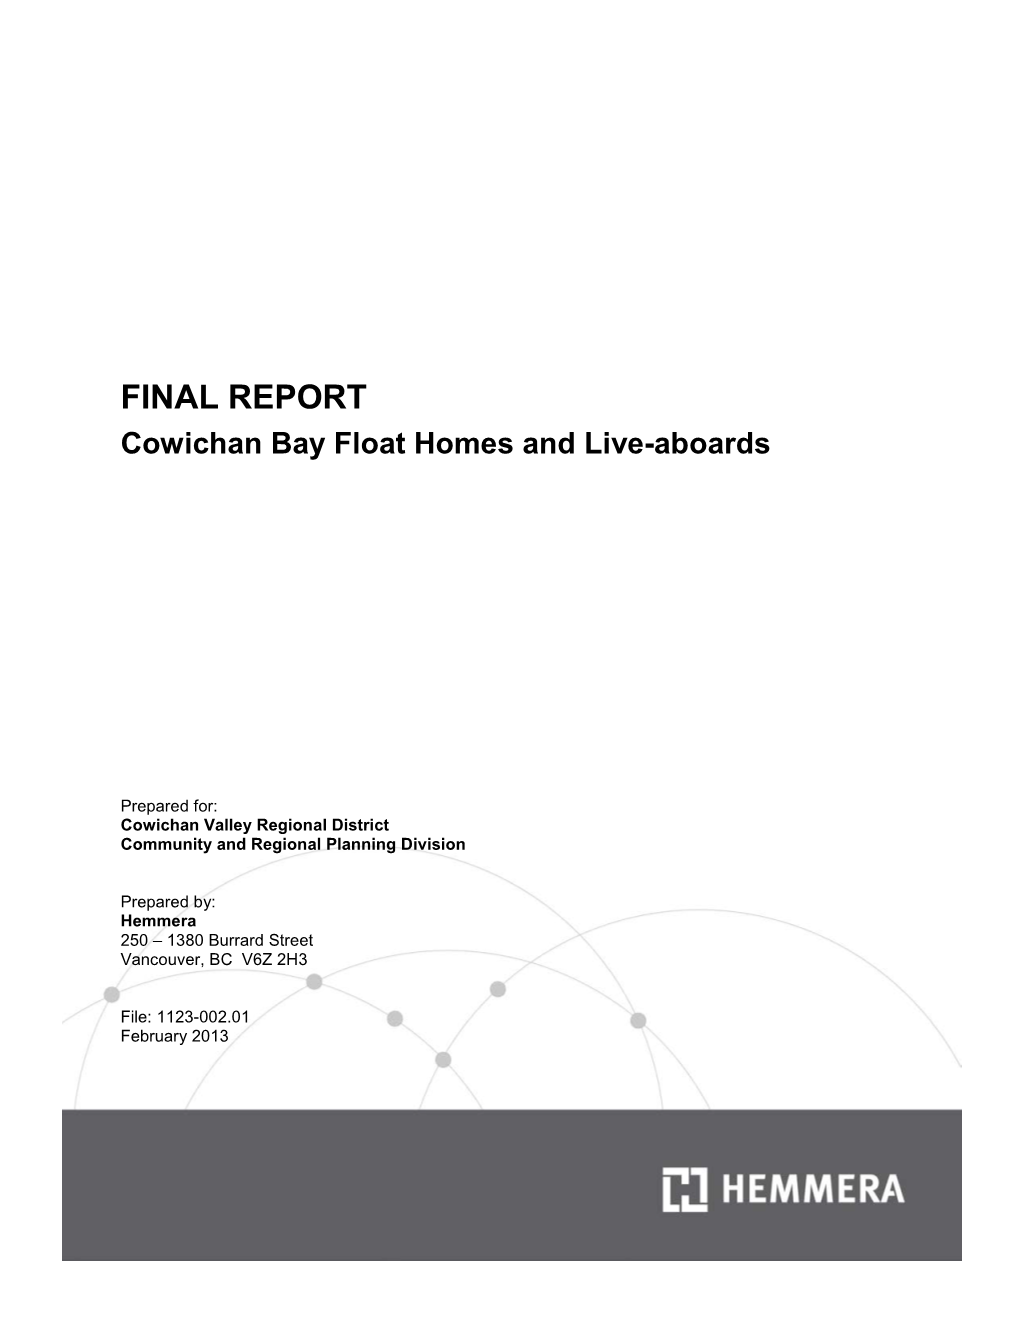 FINAL REPORT Cowichan Bay Float Homes and Live-Aboards